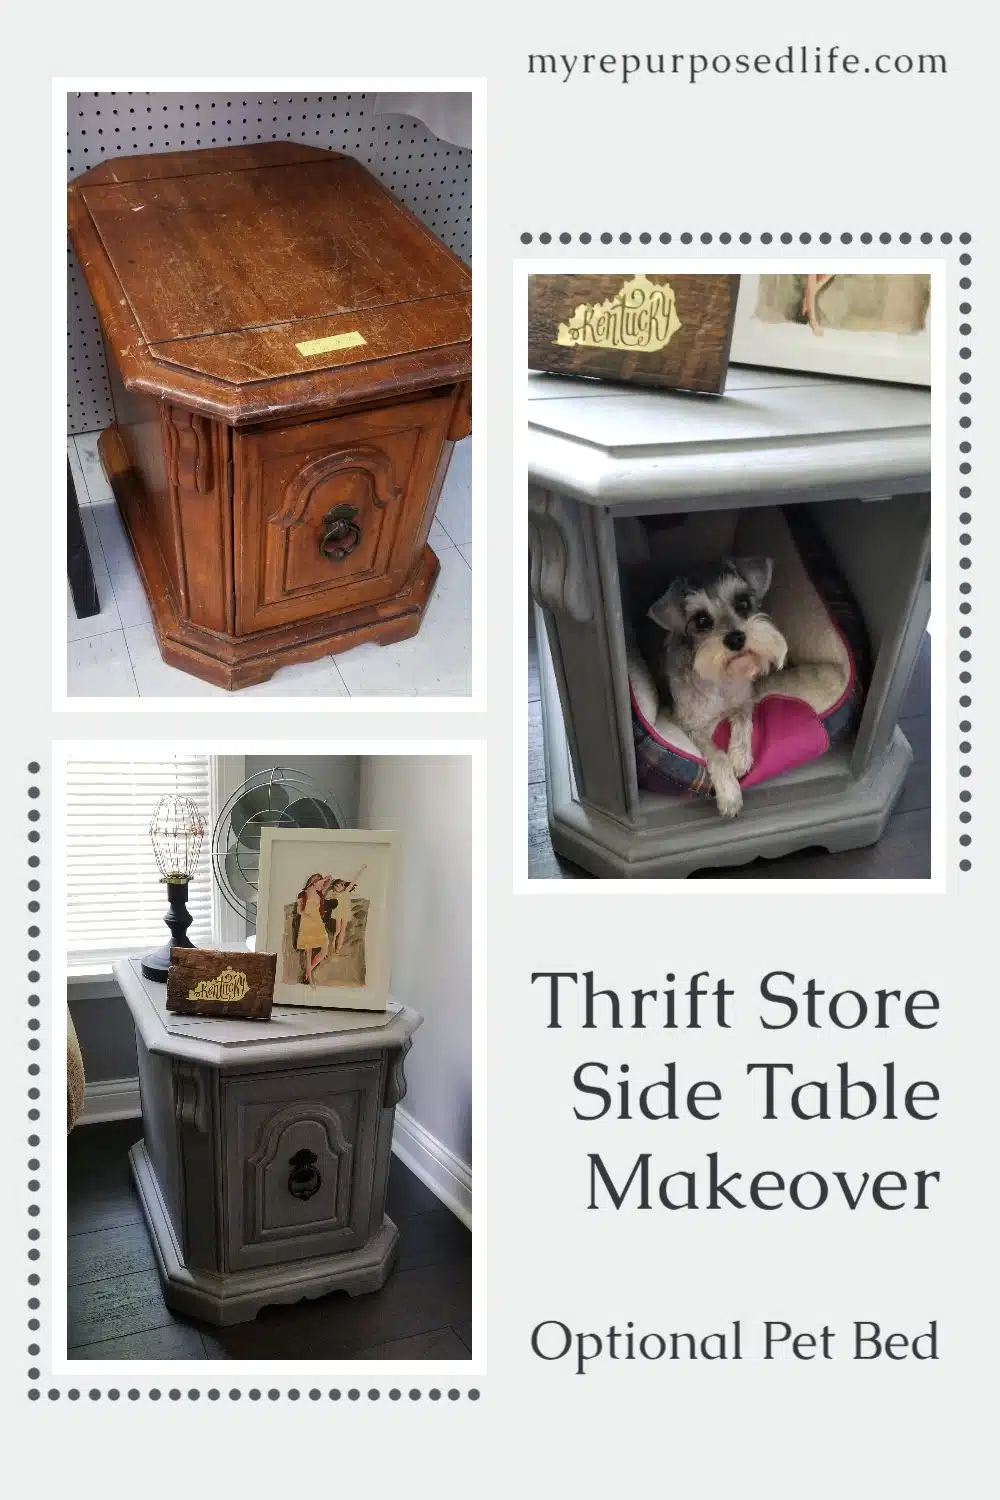 This easy side table makeover makes a perfect bed bed or hideaway if you open the door or even remove it! #MyRepurposedLife #repurposed #furniture #sidetable #pets via @repurposedlife